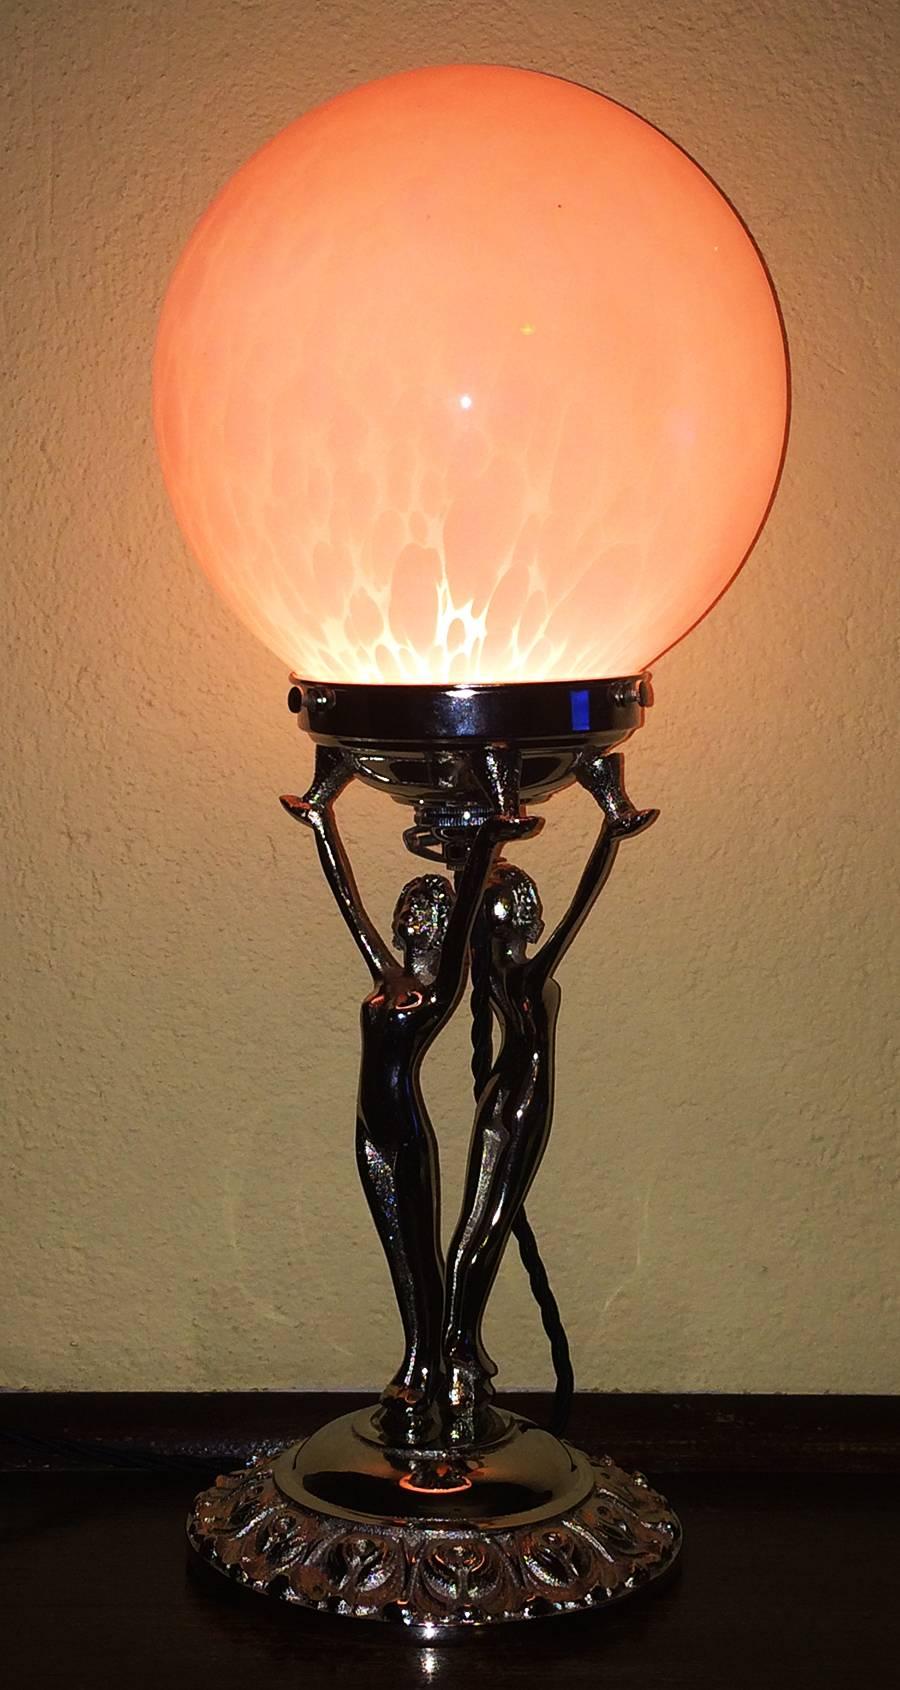 An Art Deco English double nude lamp in an early Diana style, circa 1930. This lamp is in near mint condition with its original pink cloud shade.